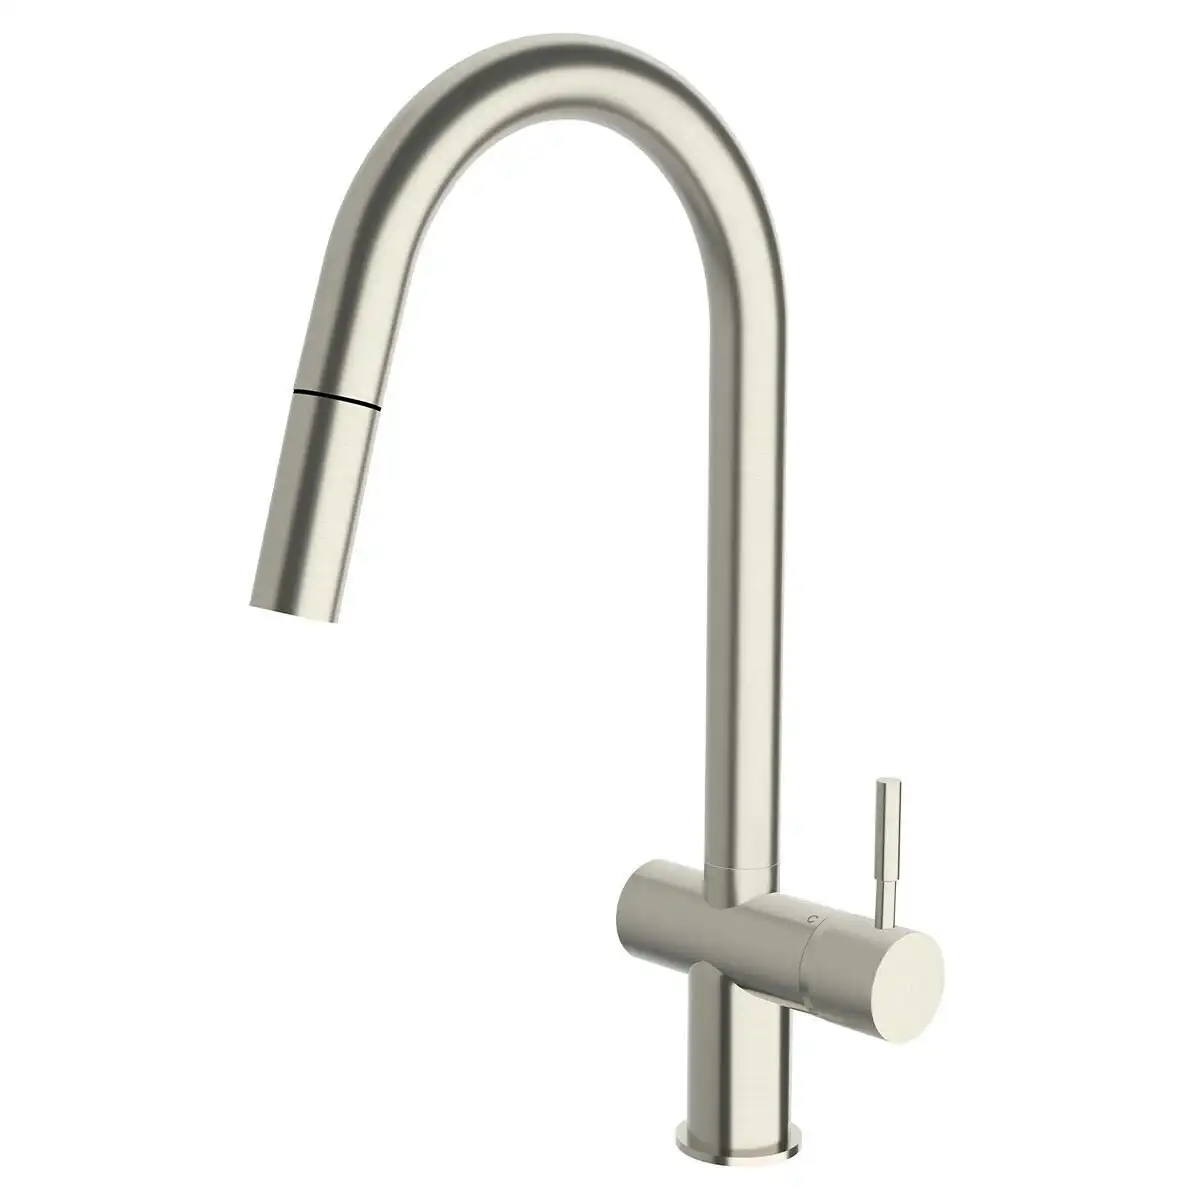 Sussex Taps Voda Sink Mixer Pullout Brushed Nickel